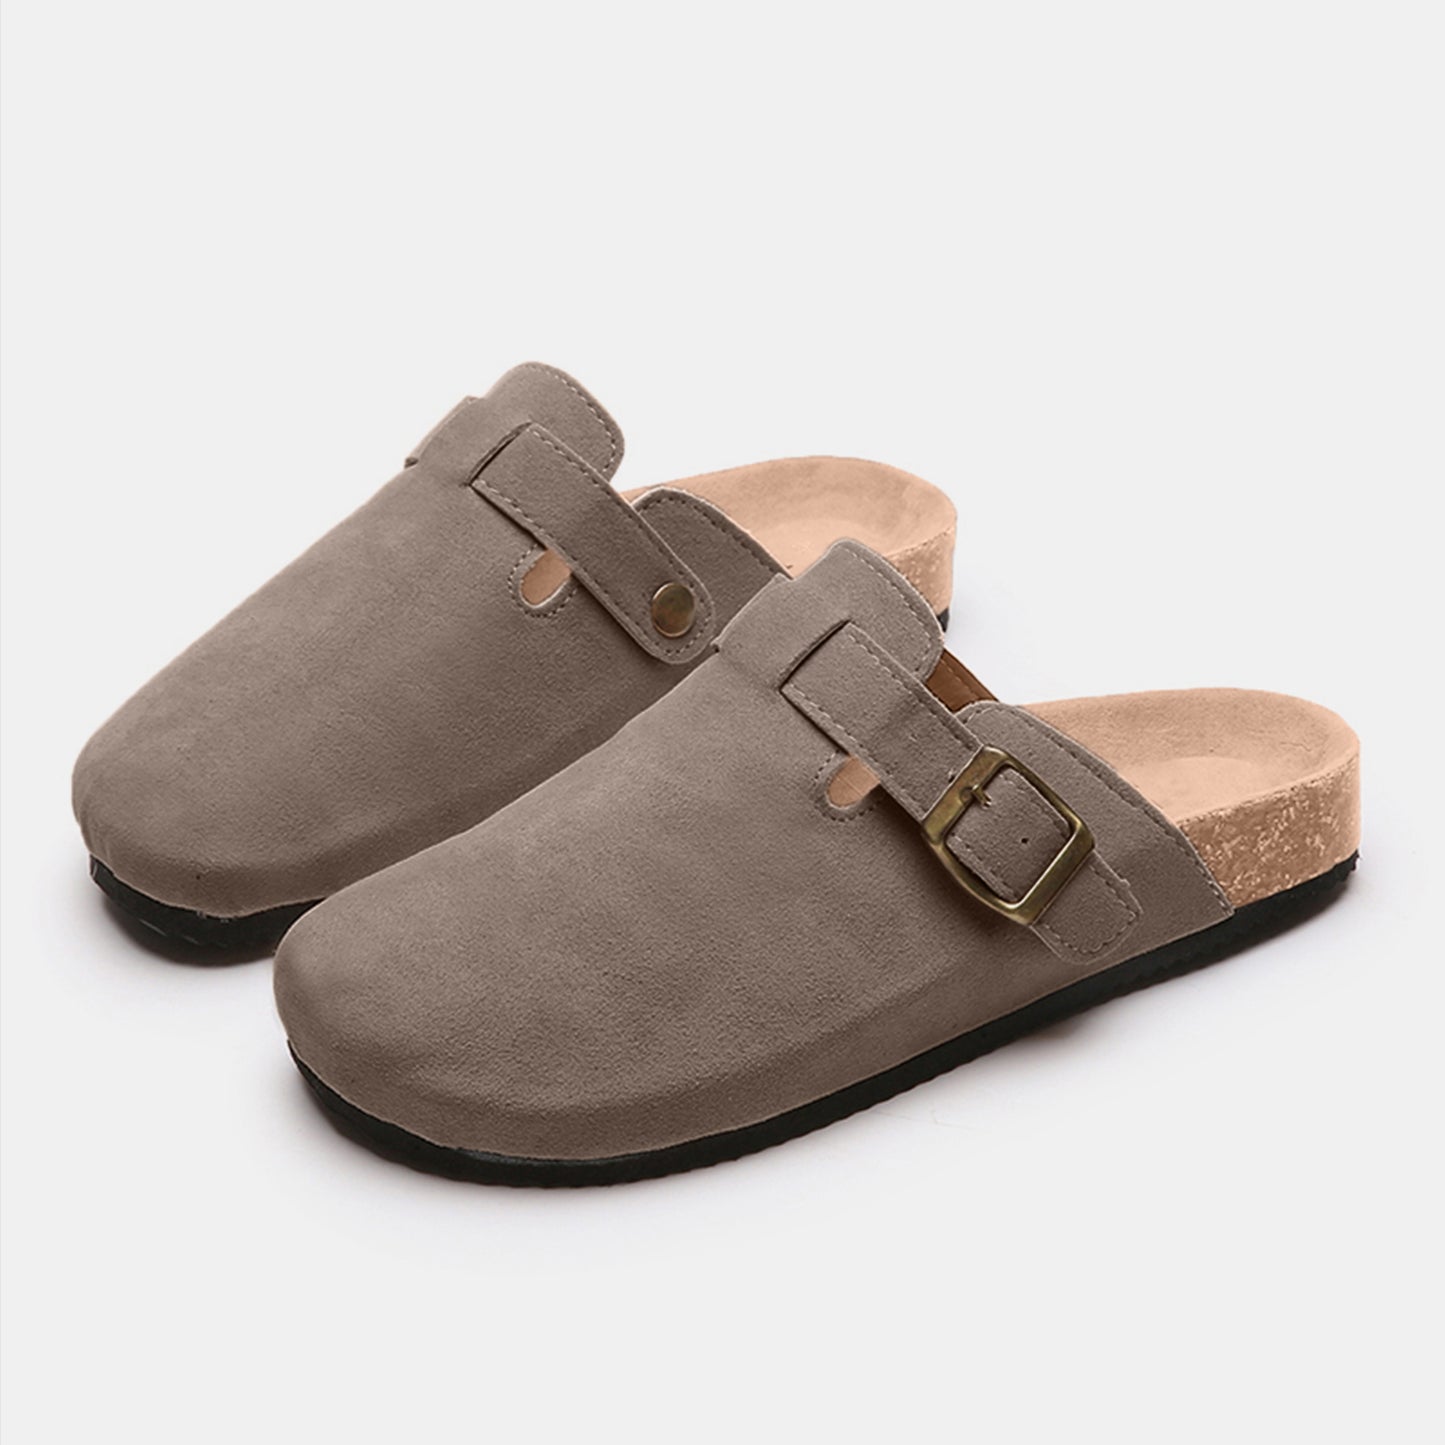 Suede Closed-Toe Buckle Slides